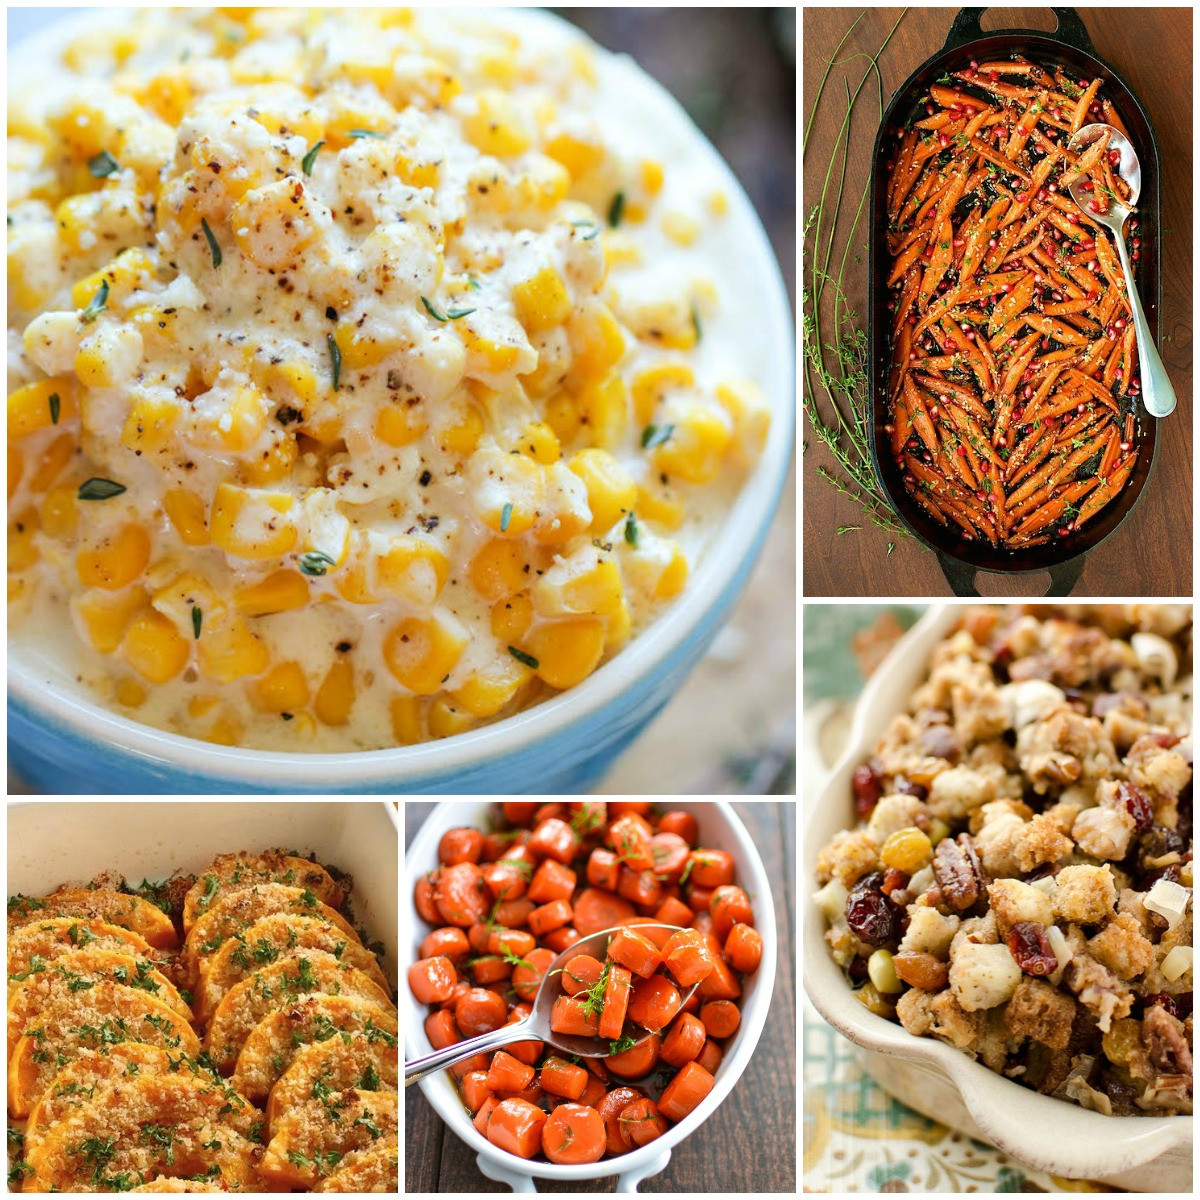 Most Popular Thanksgiving Side Dishes
 25 Most Pinned Side Dish Recipes for Thanksgiving and